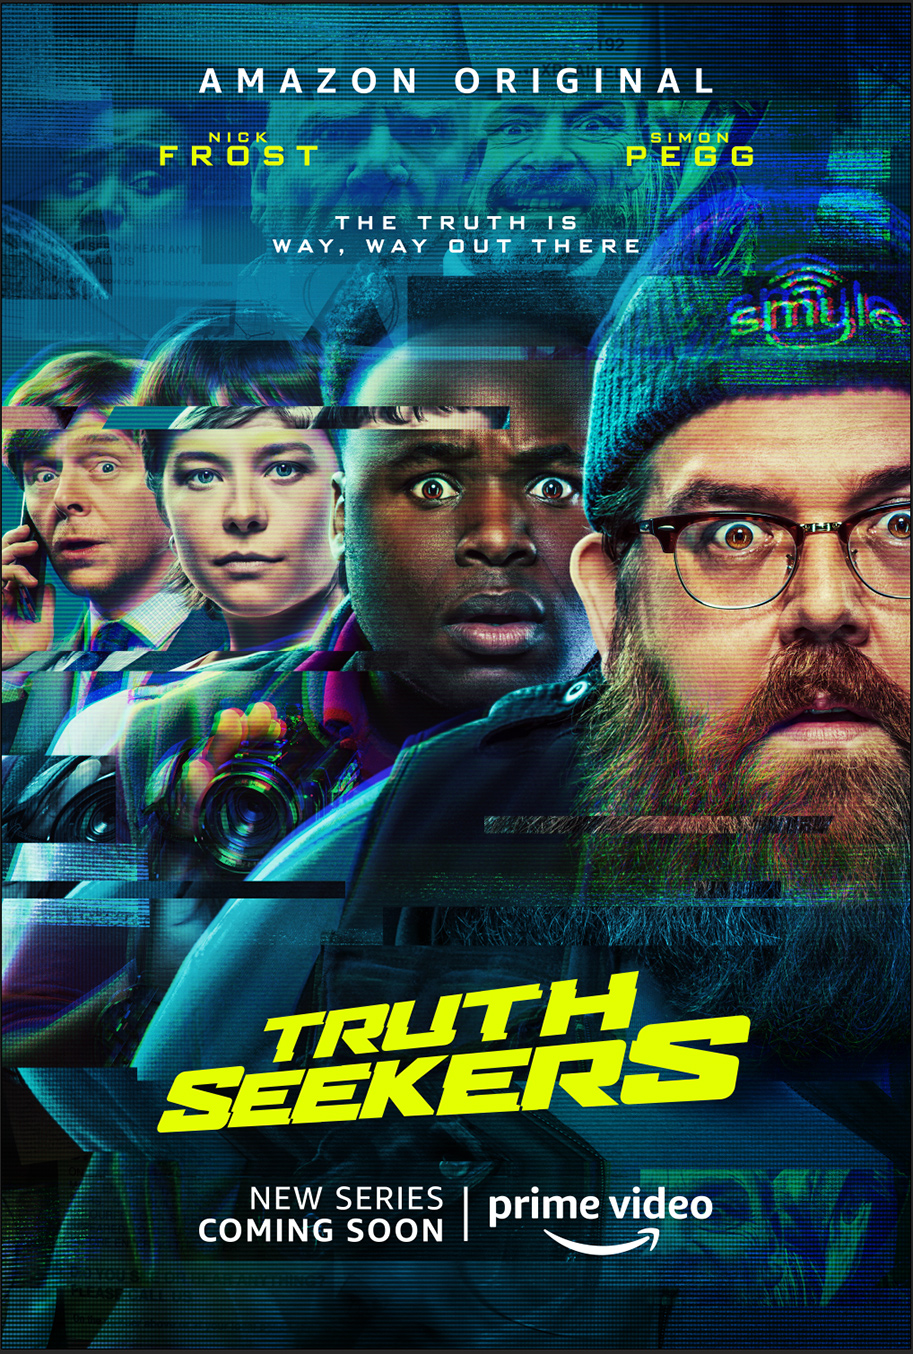 Truth Seekers, Amazon, poster, SImon Pegg, Nick Frost